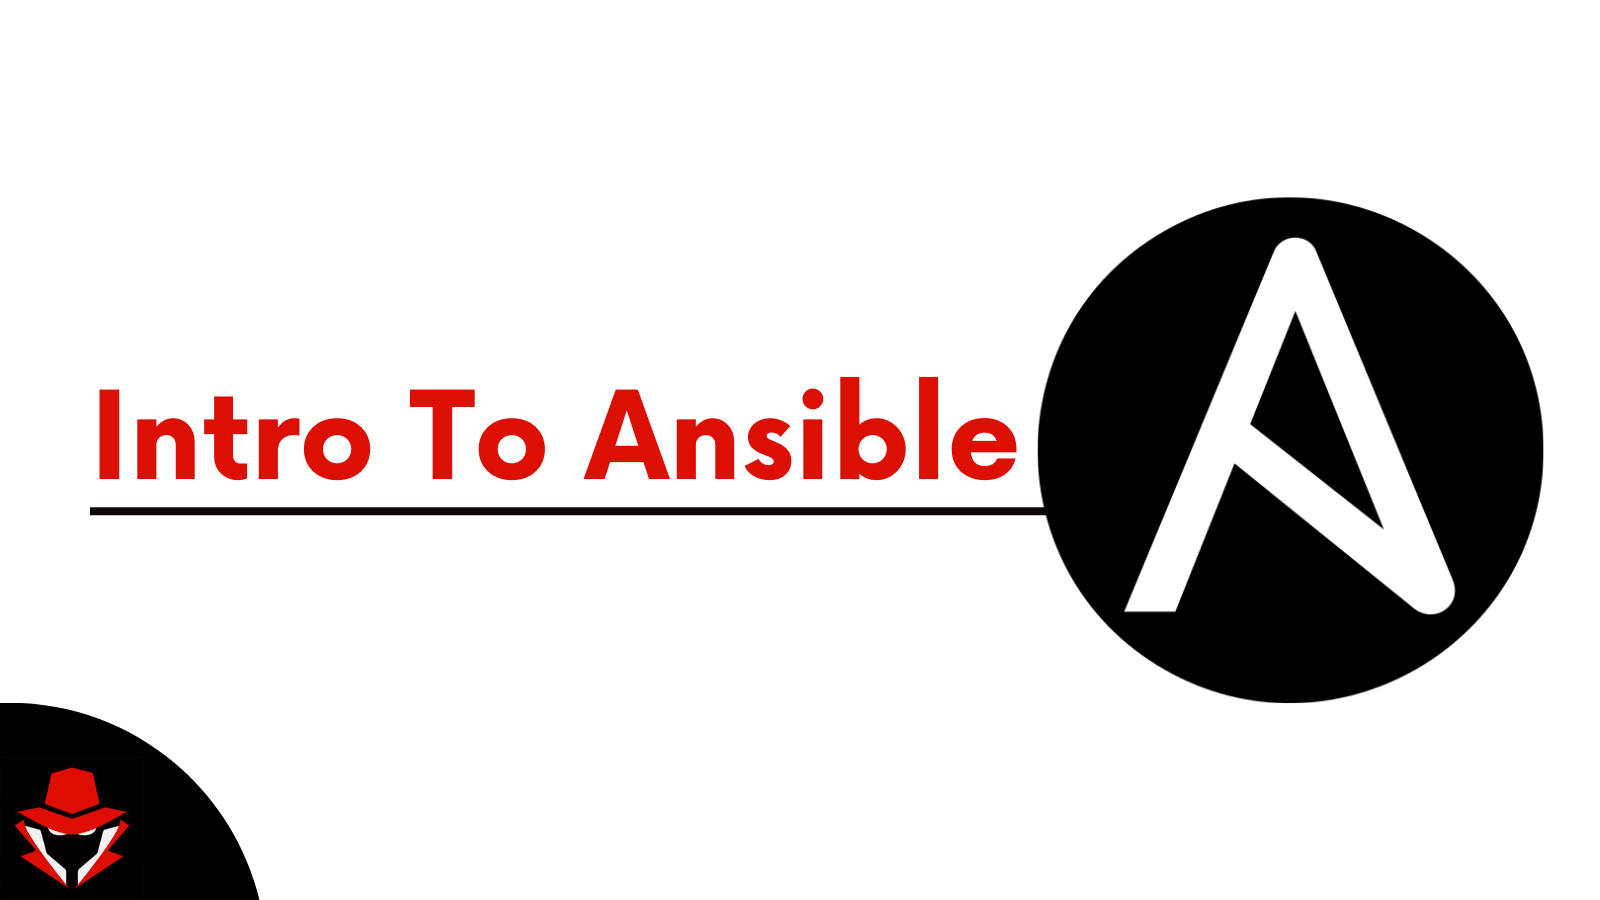 Intro To Ansible image